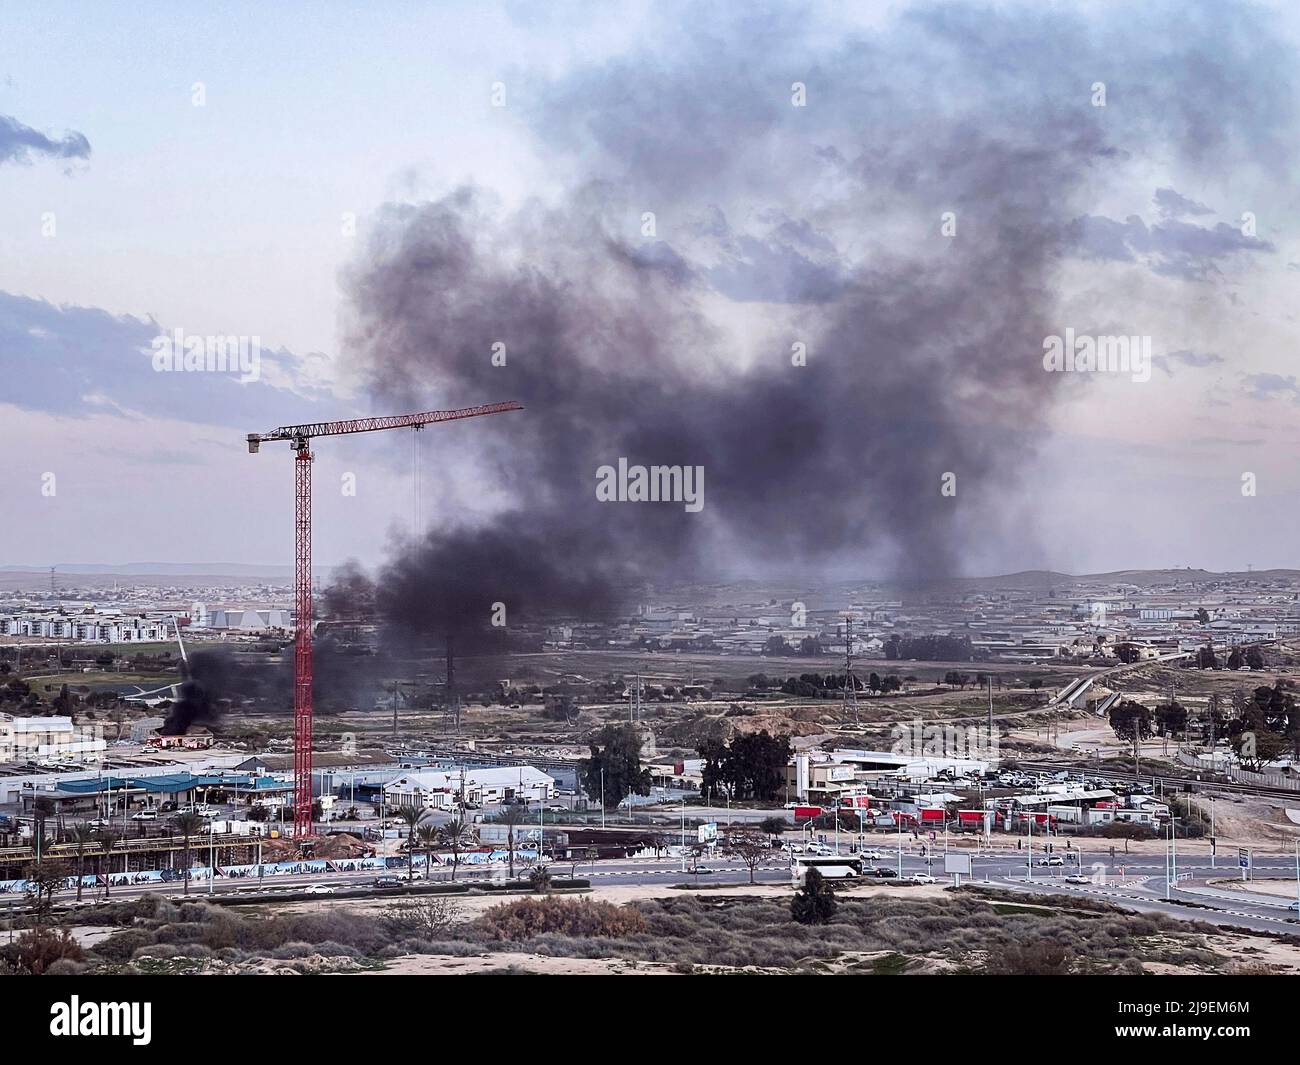 black smoke billows from a small building in an industrial and warehouse district of a city in the Negev region in Israel Stock Photo